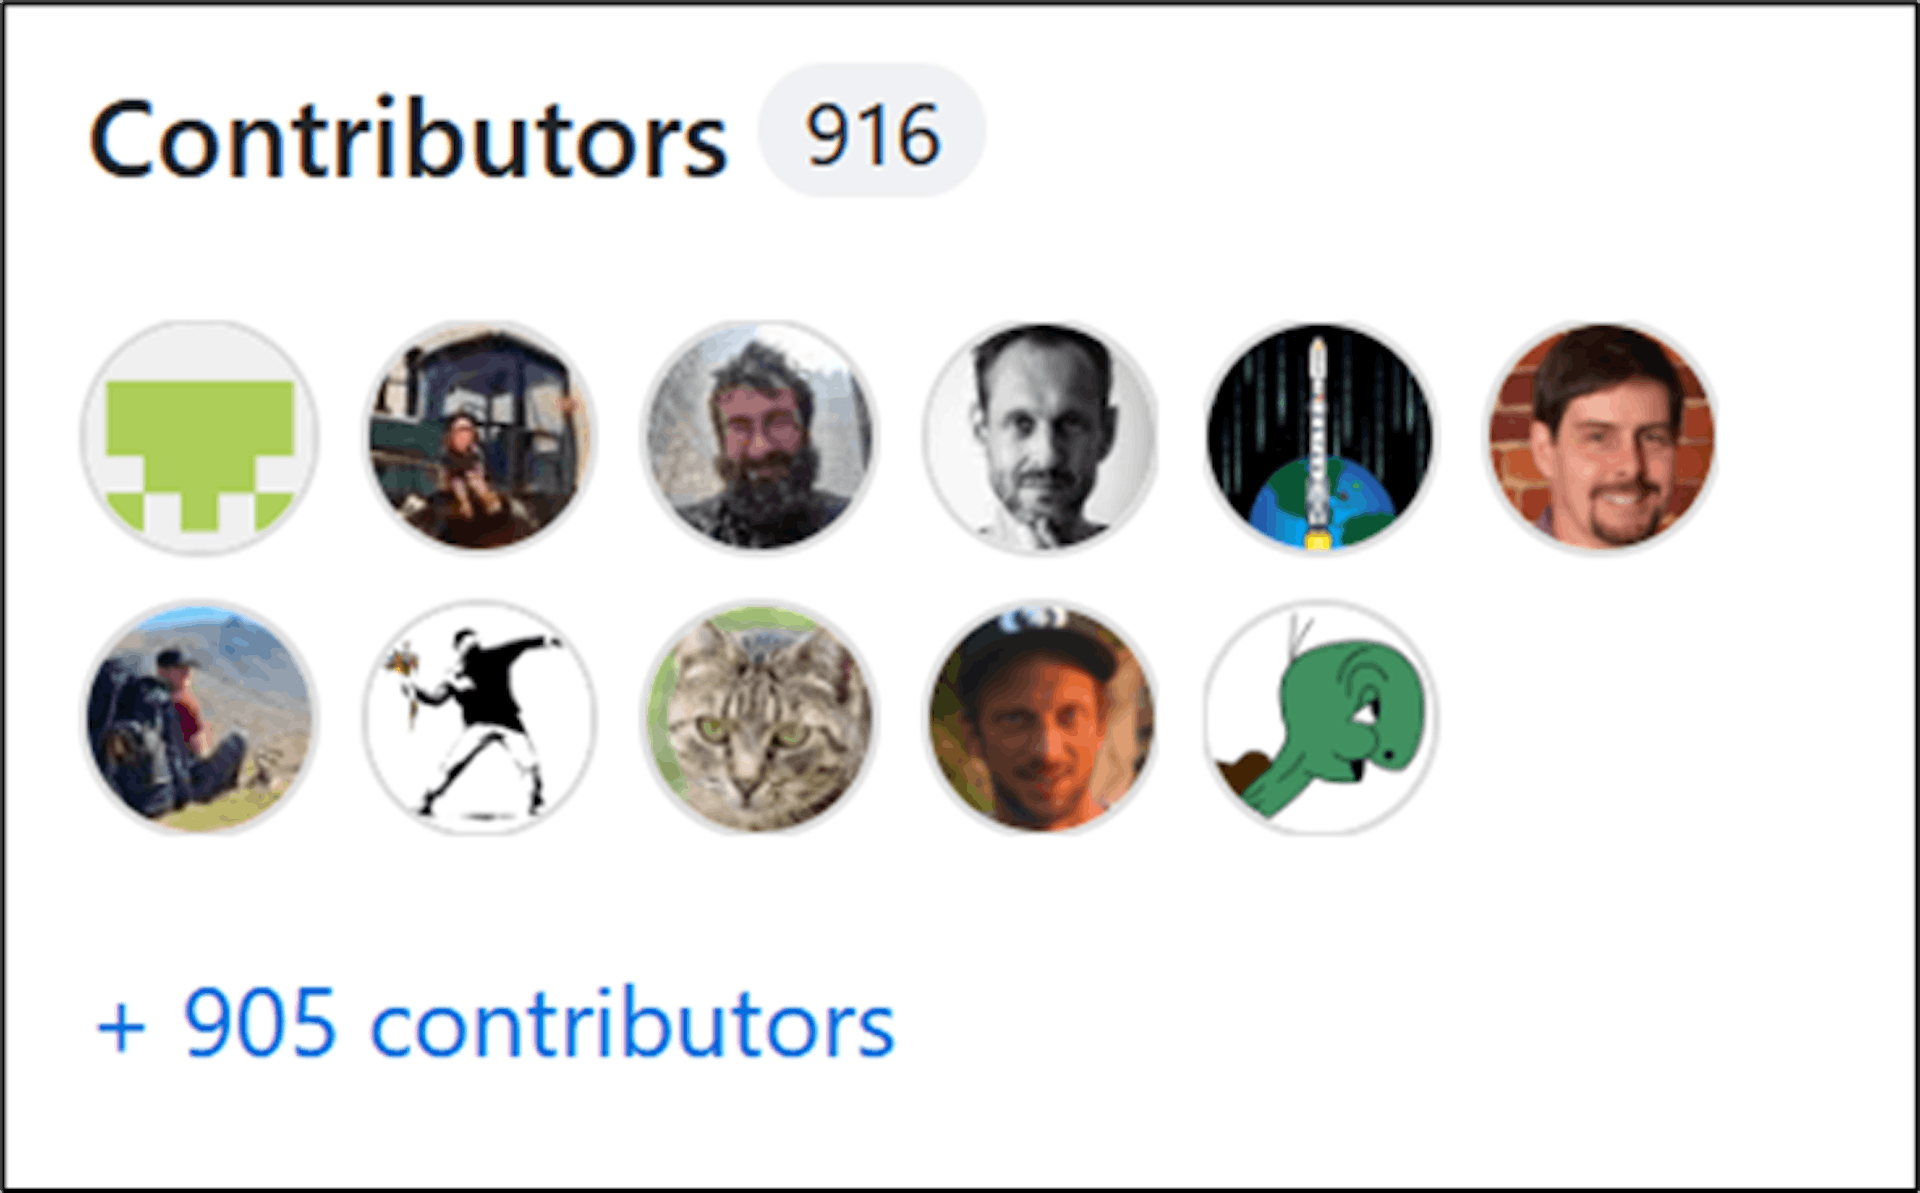 There have been 916 contributors to Bitcoin's code so far